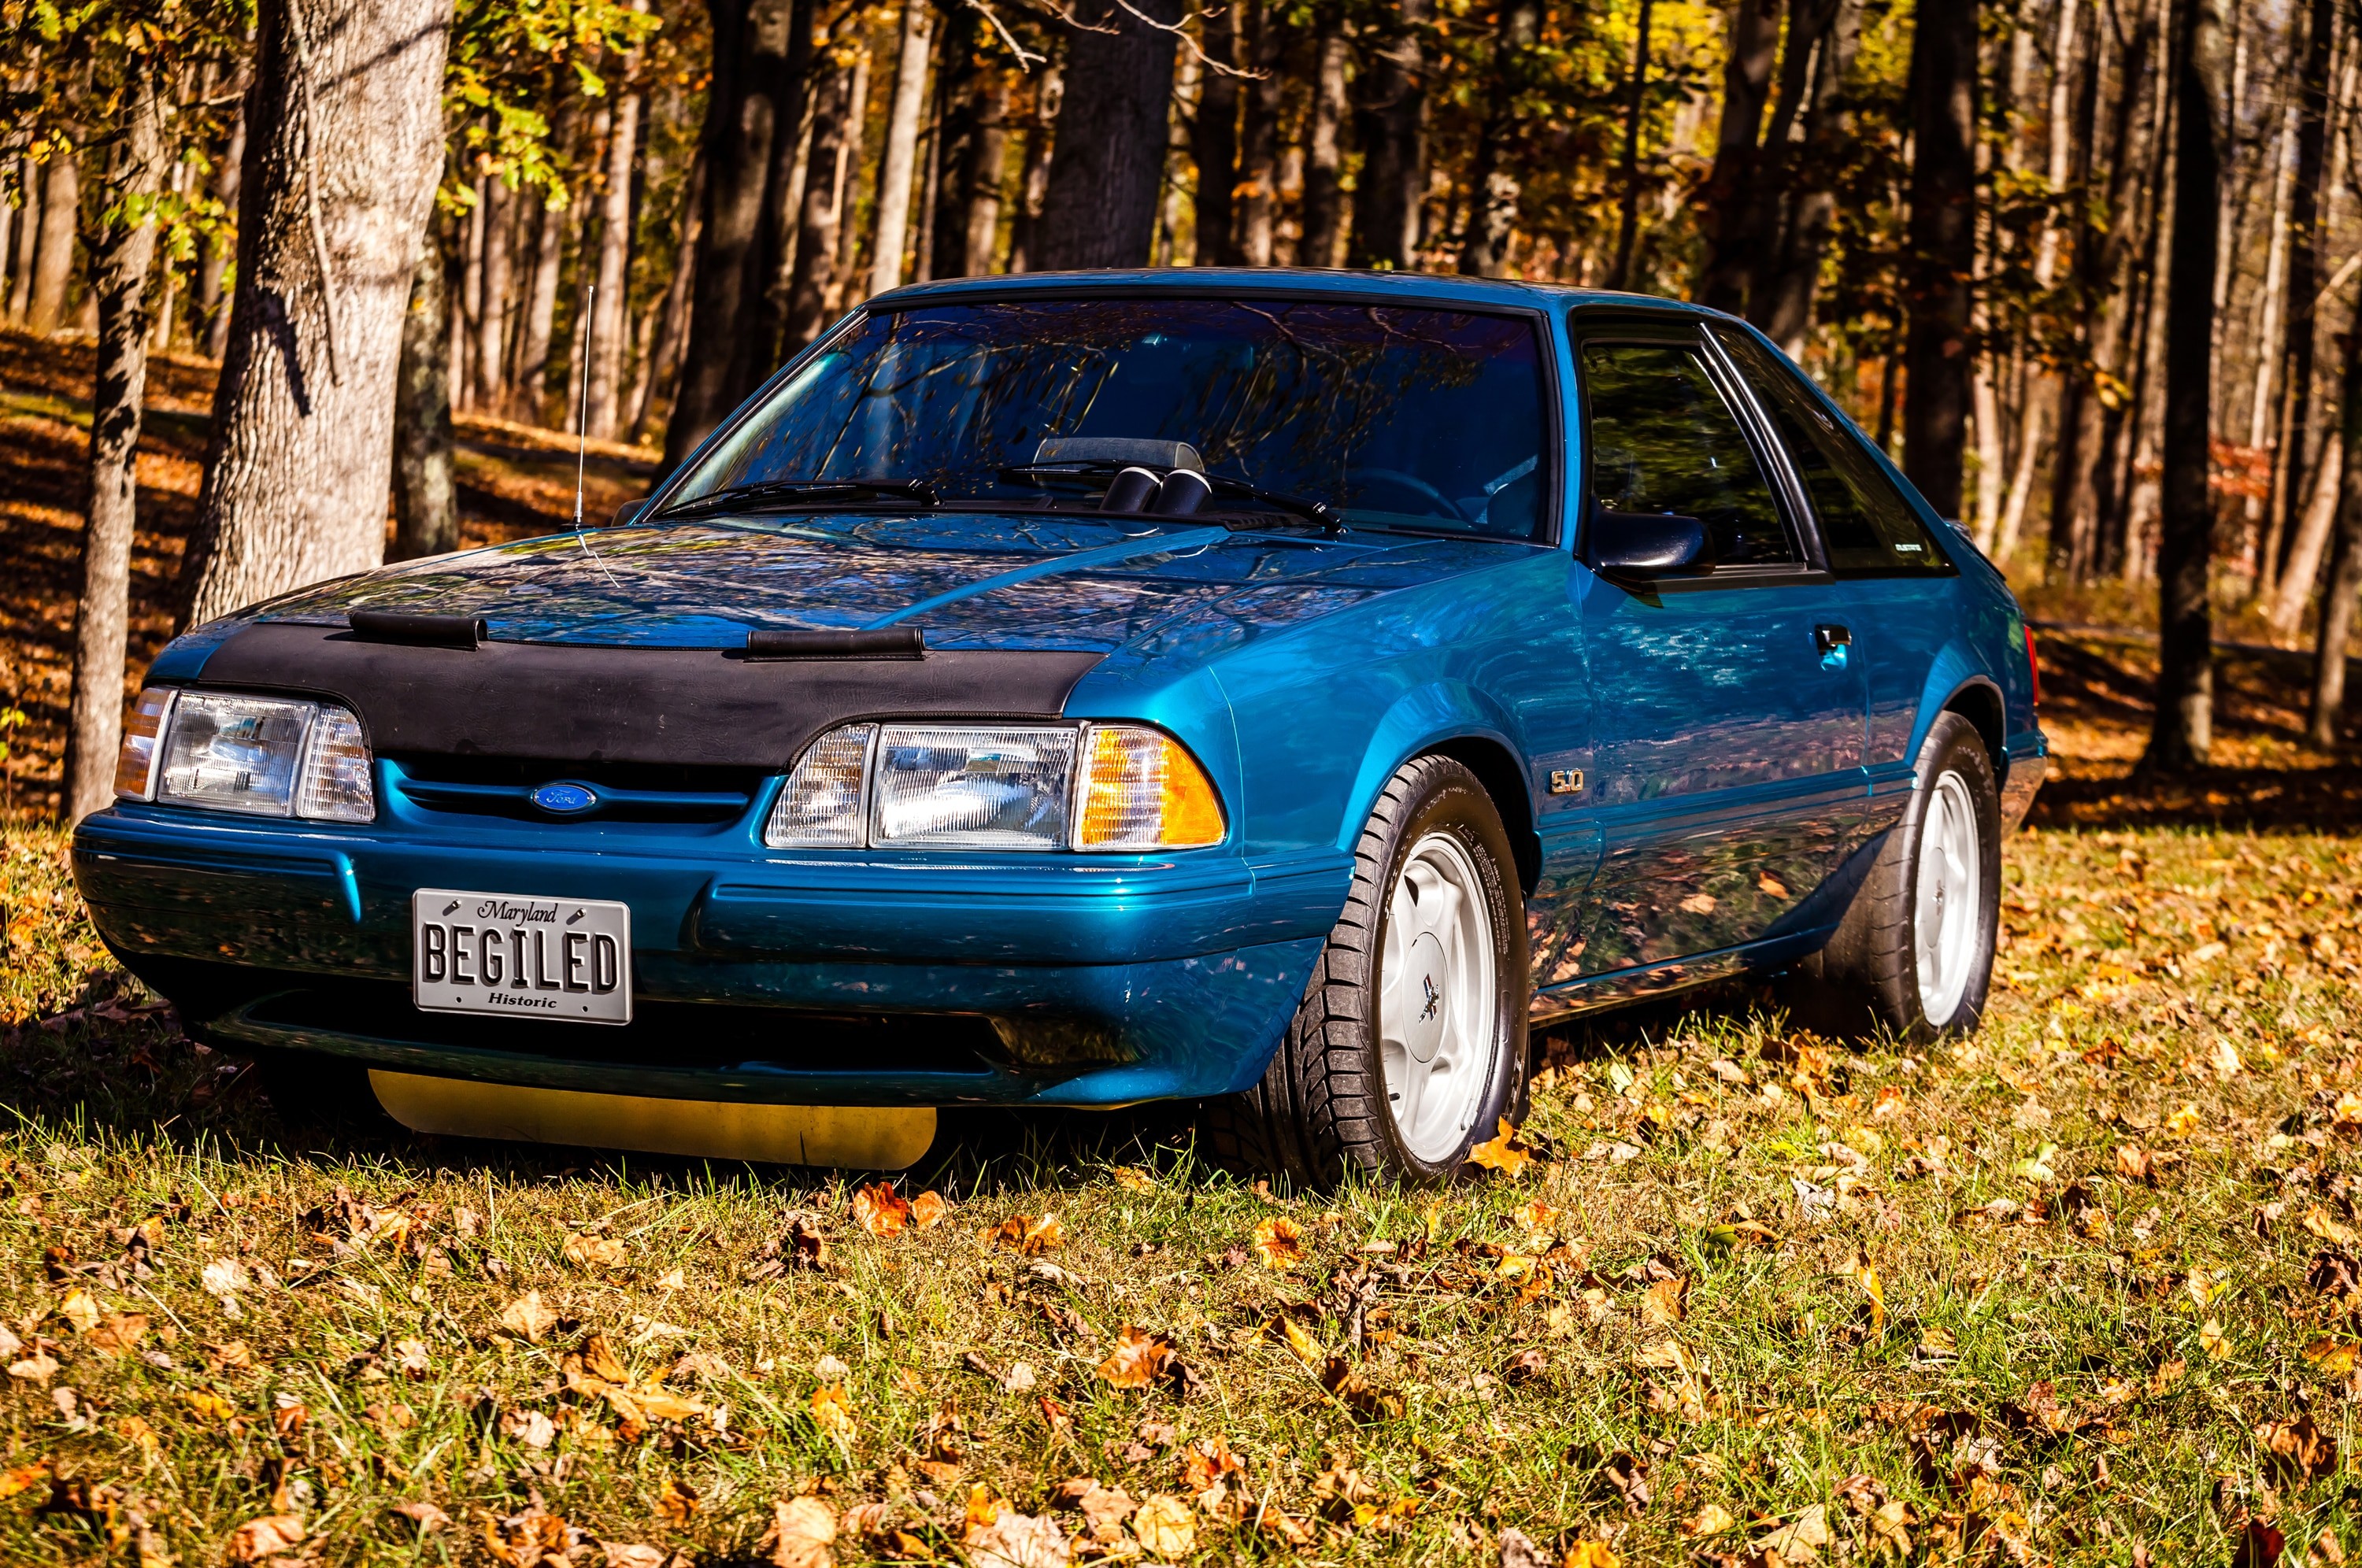 1993 FORD MUSTANG